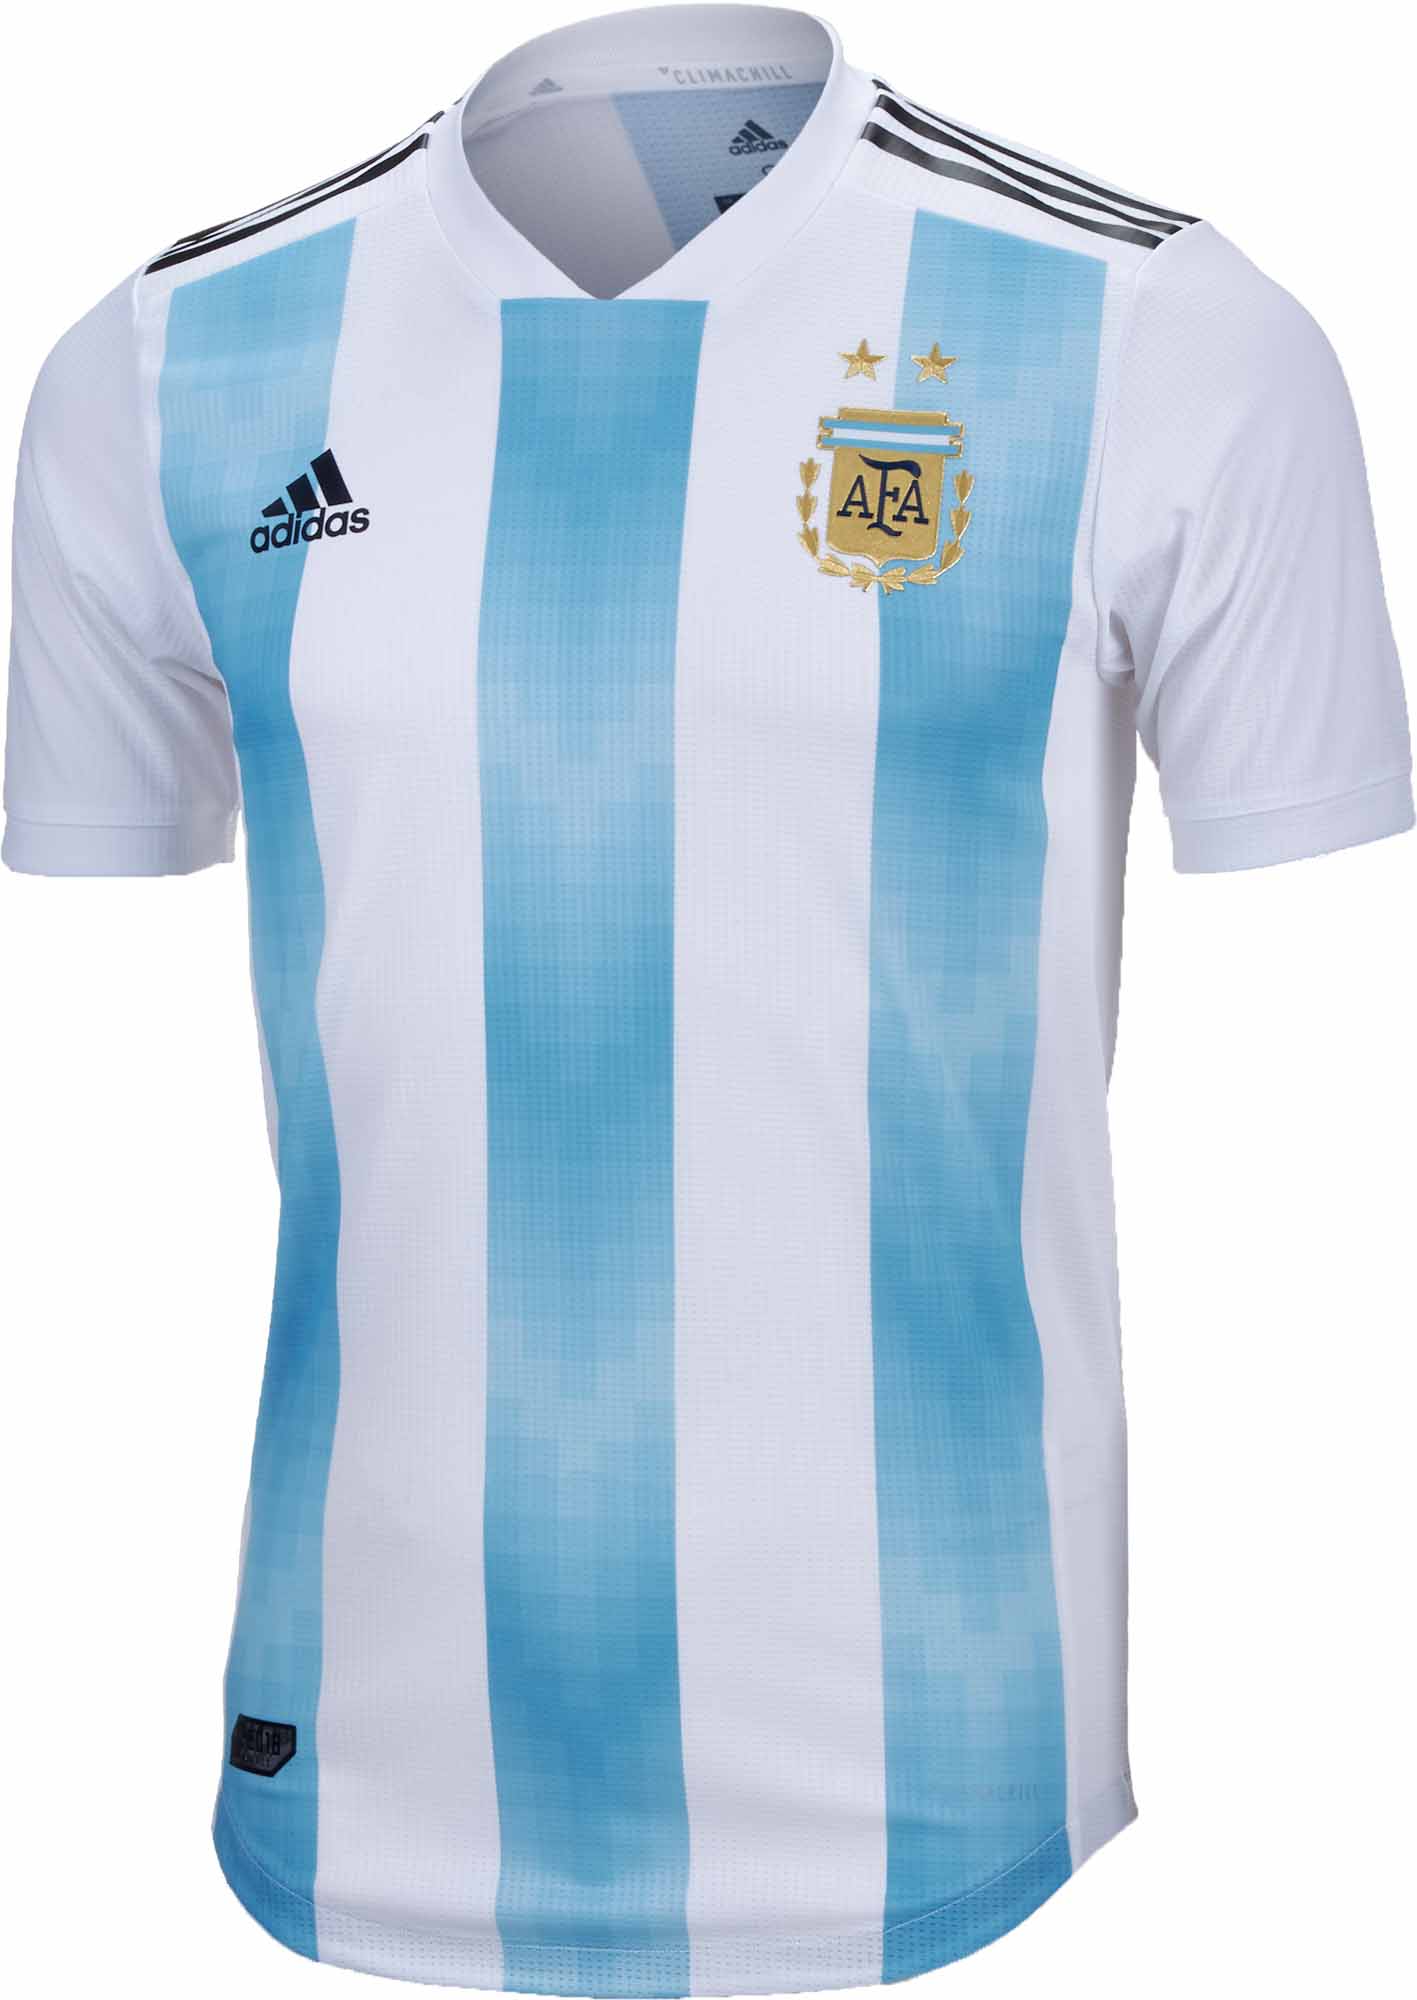 adidas Argentina Authentic Home Jersey 201819 SoccerPro